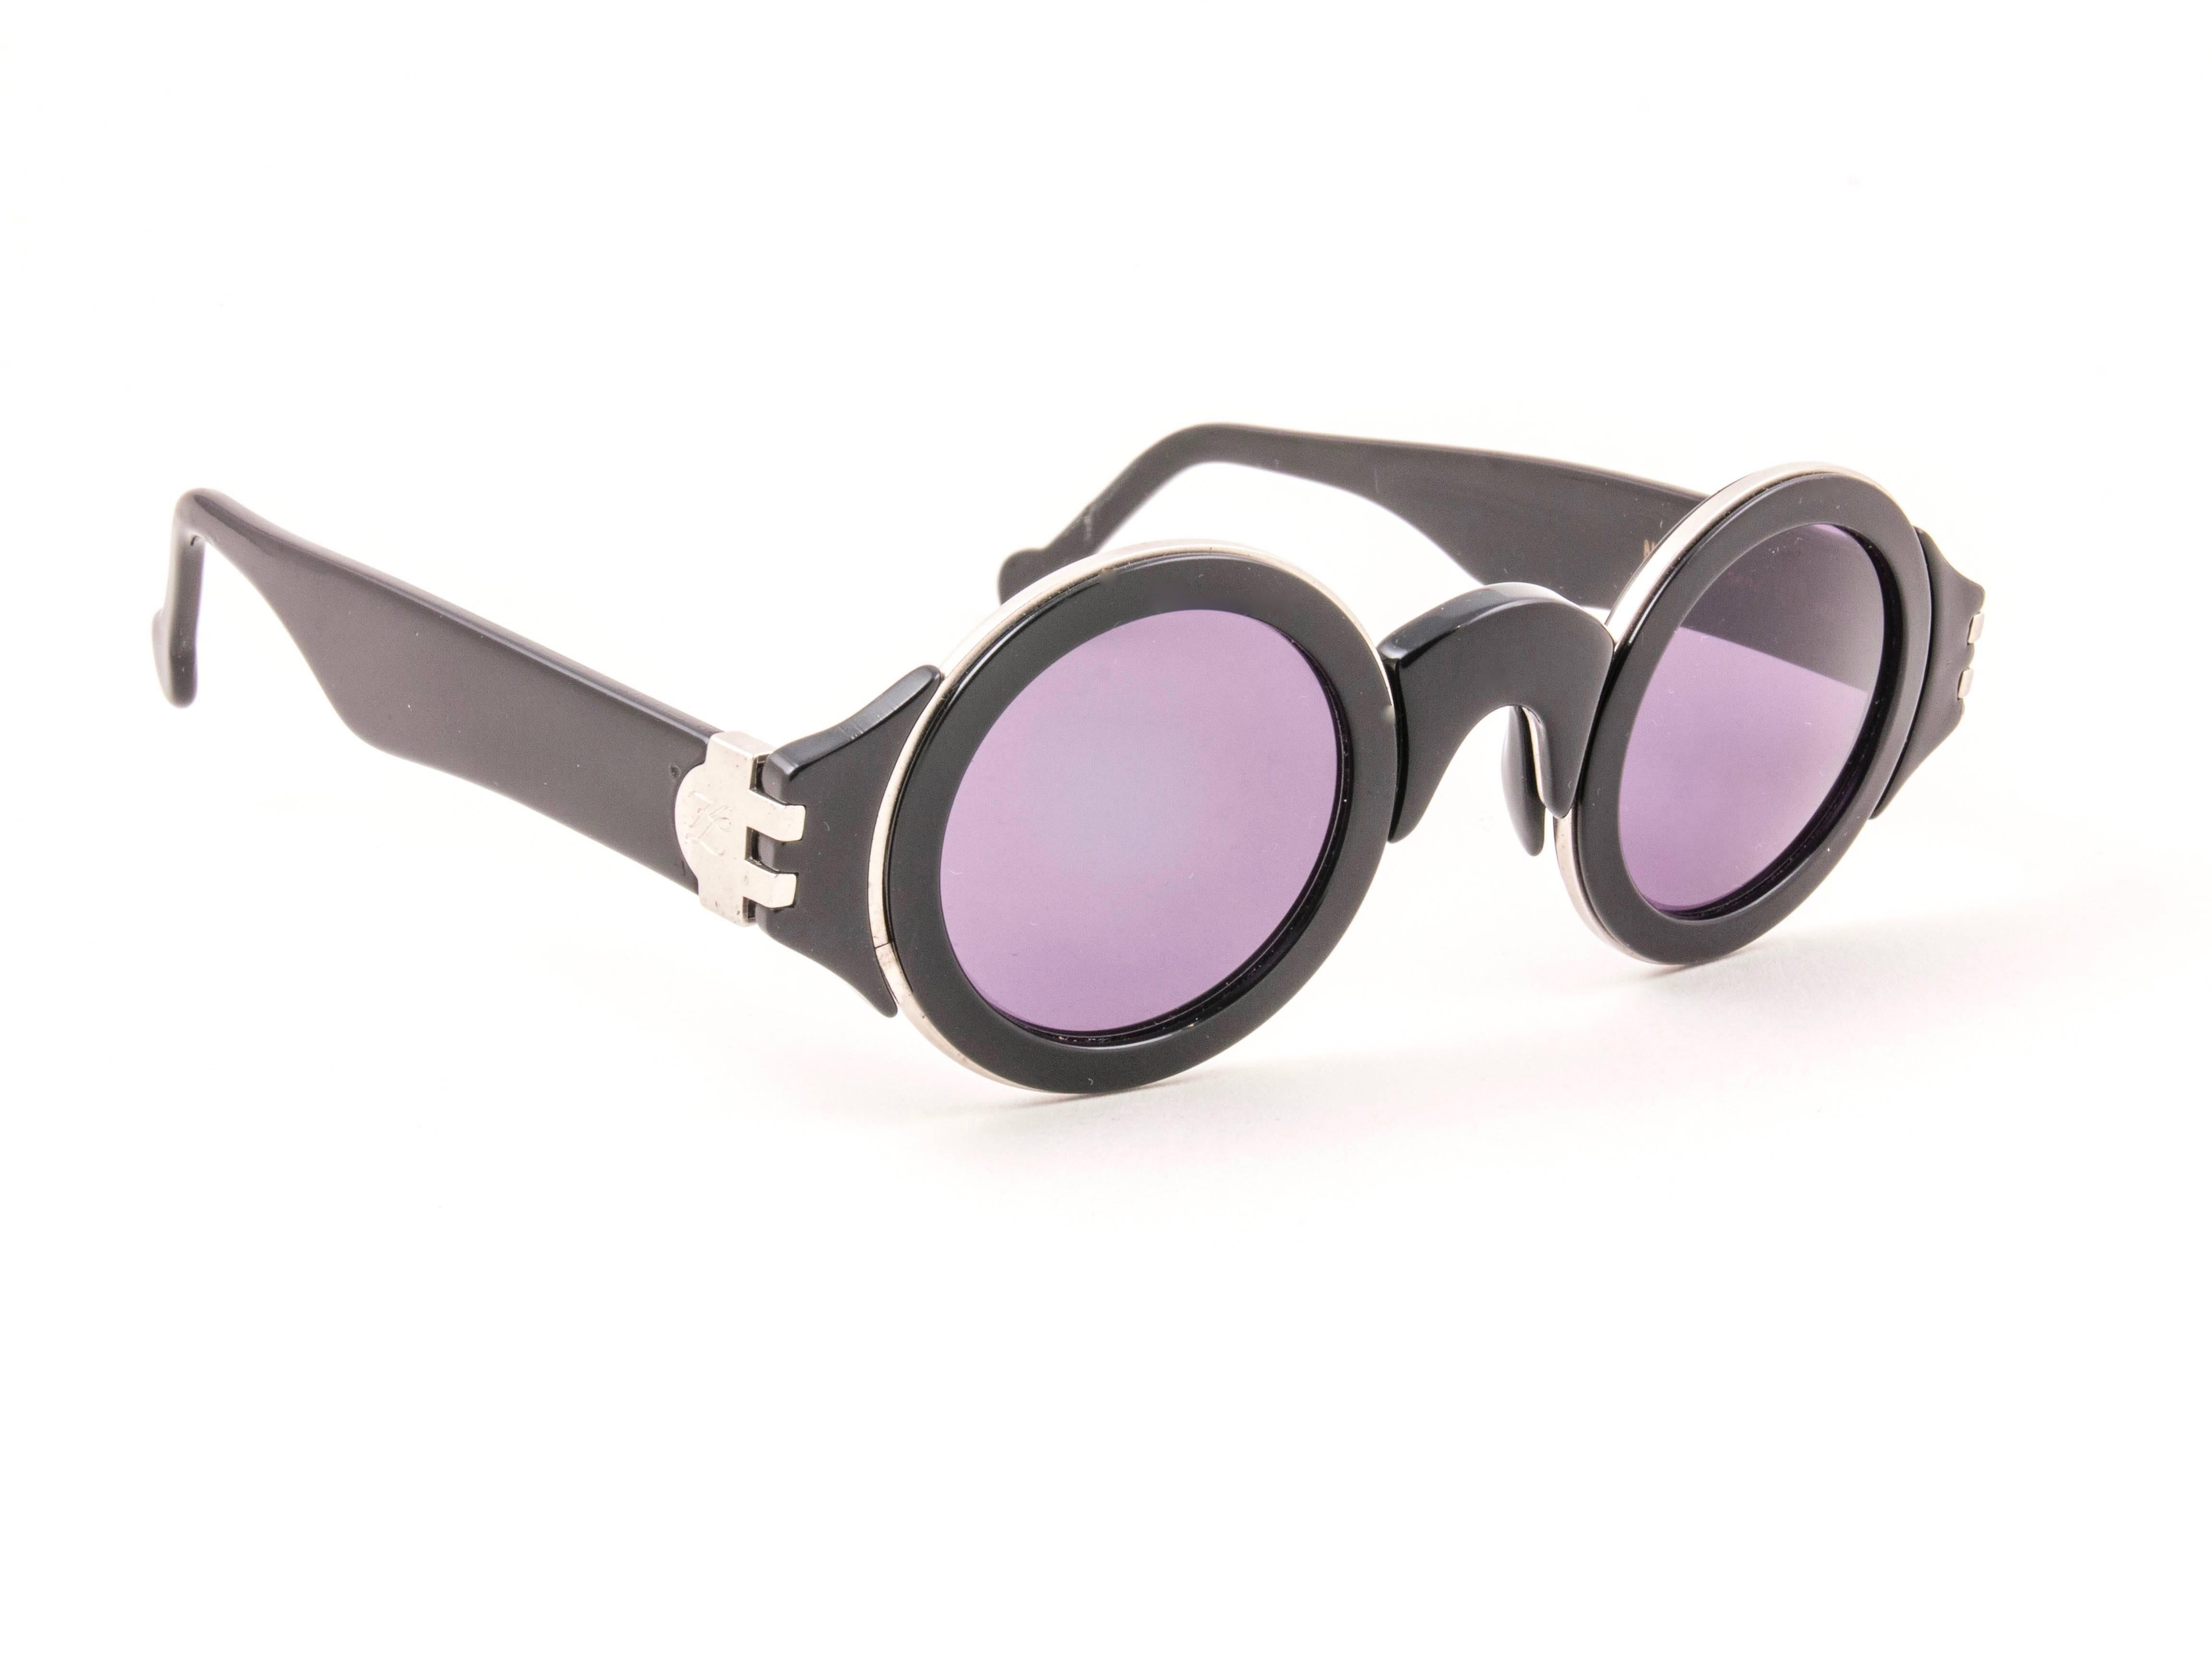 Striking pair of vintage Karl Lagerfeld 1184 Round black & silver inserts sunglasses sporting a spotless pair of grey lenses.   

New, never used or displayed, this pair of vintage Karl Lagerfeld is a rare sought after piece not to miss out!